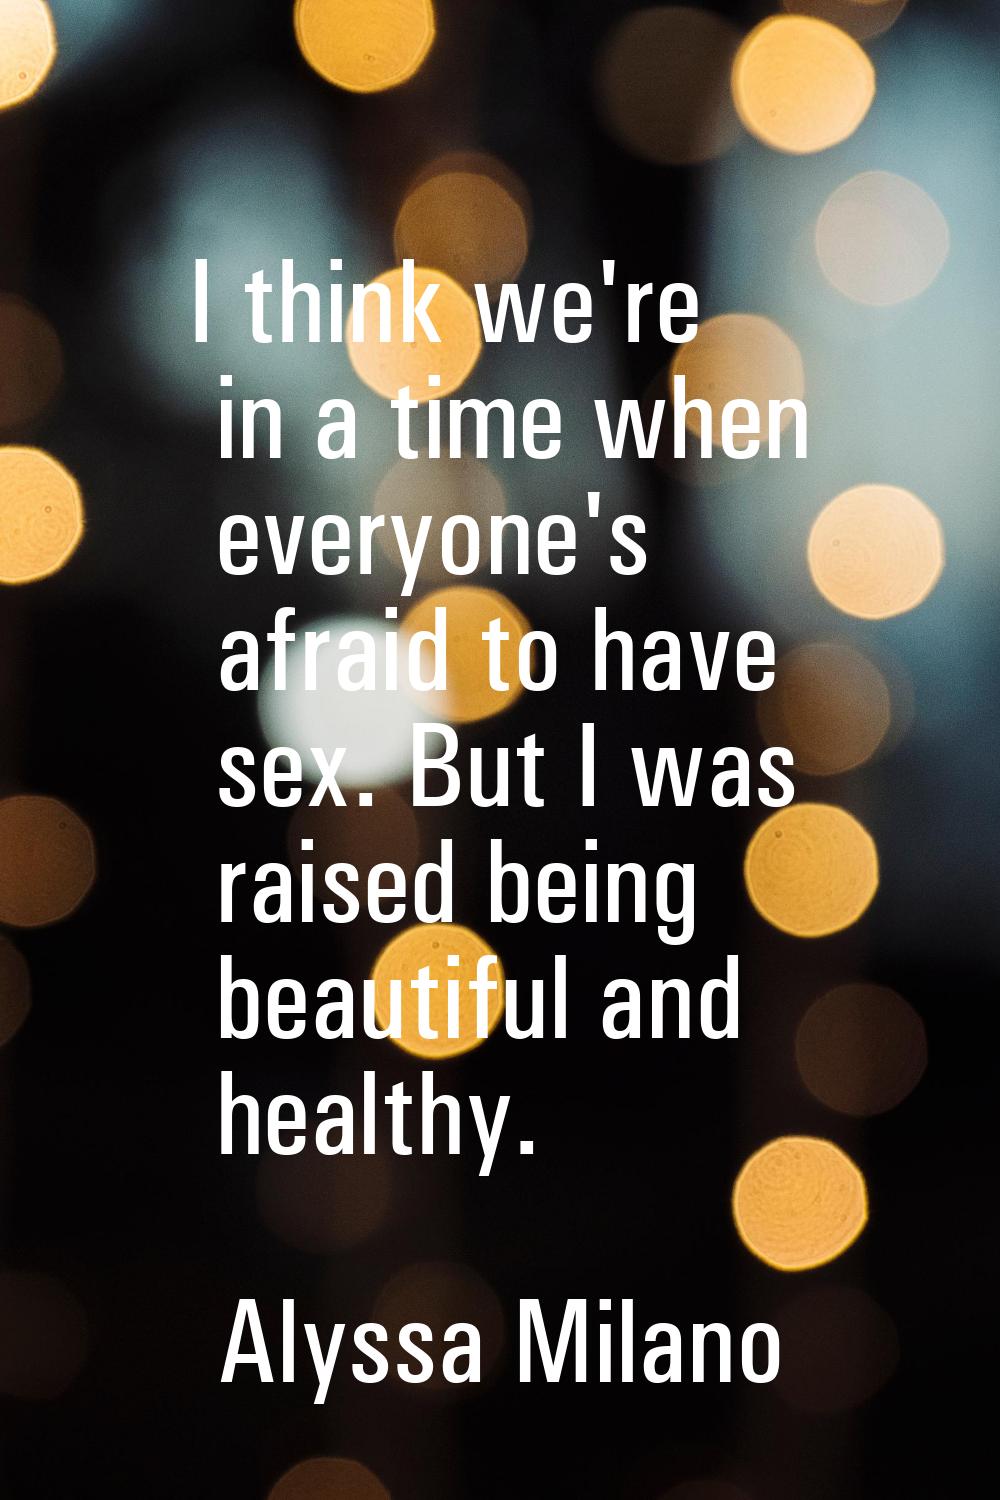 I think we're in a time when everyone's afraid to have sex. But I was raised being beautiful and he